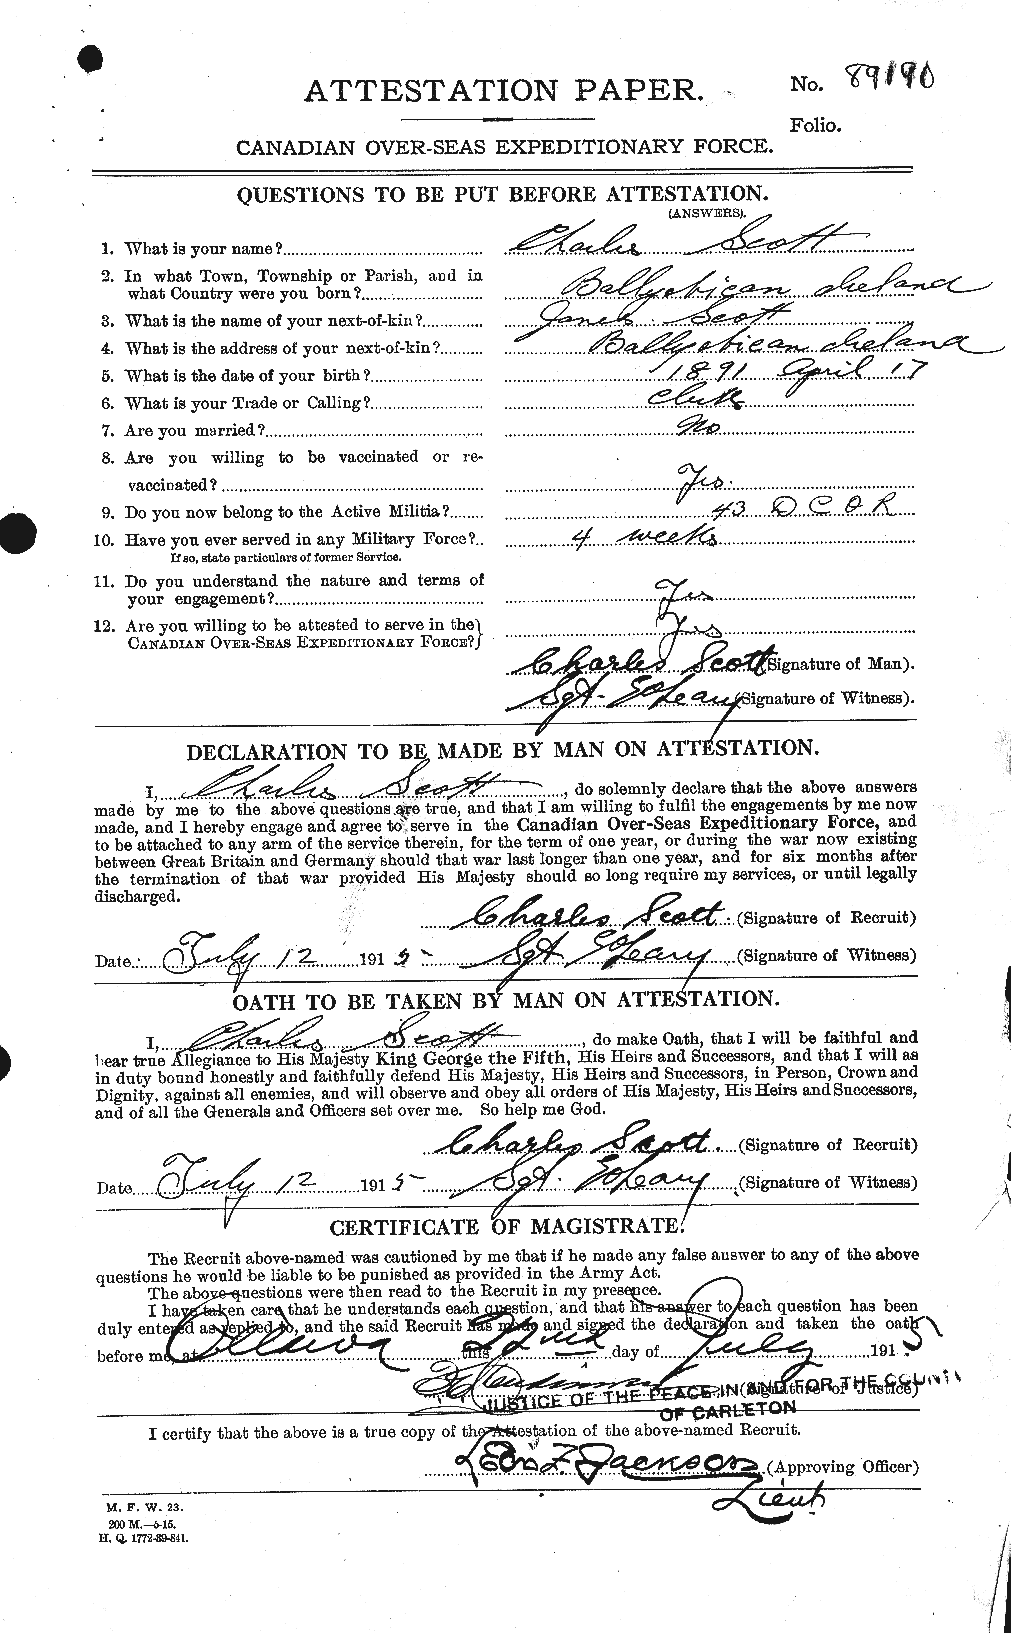 Personnel Records of the First World War - CEF 085911a